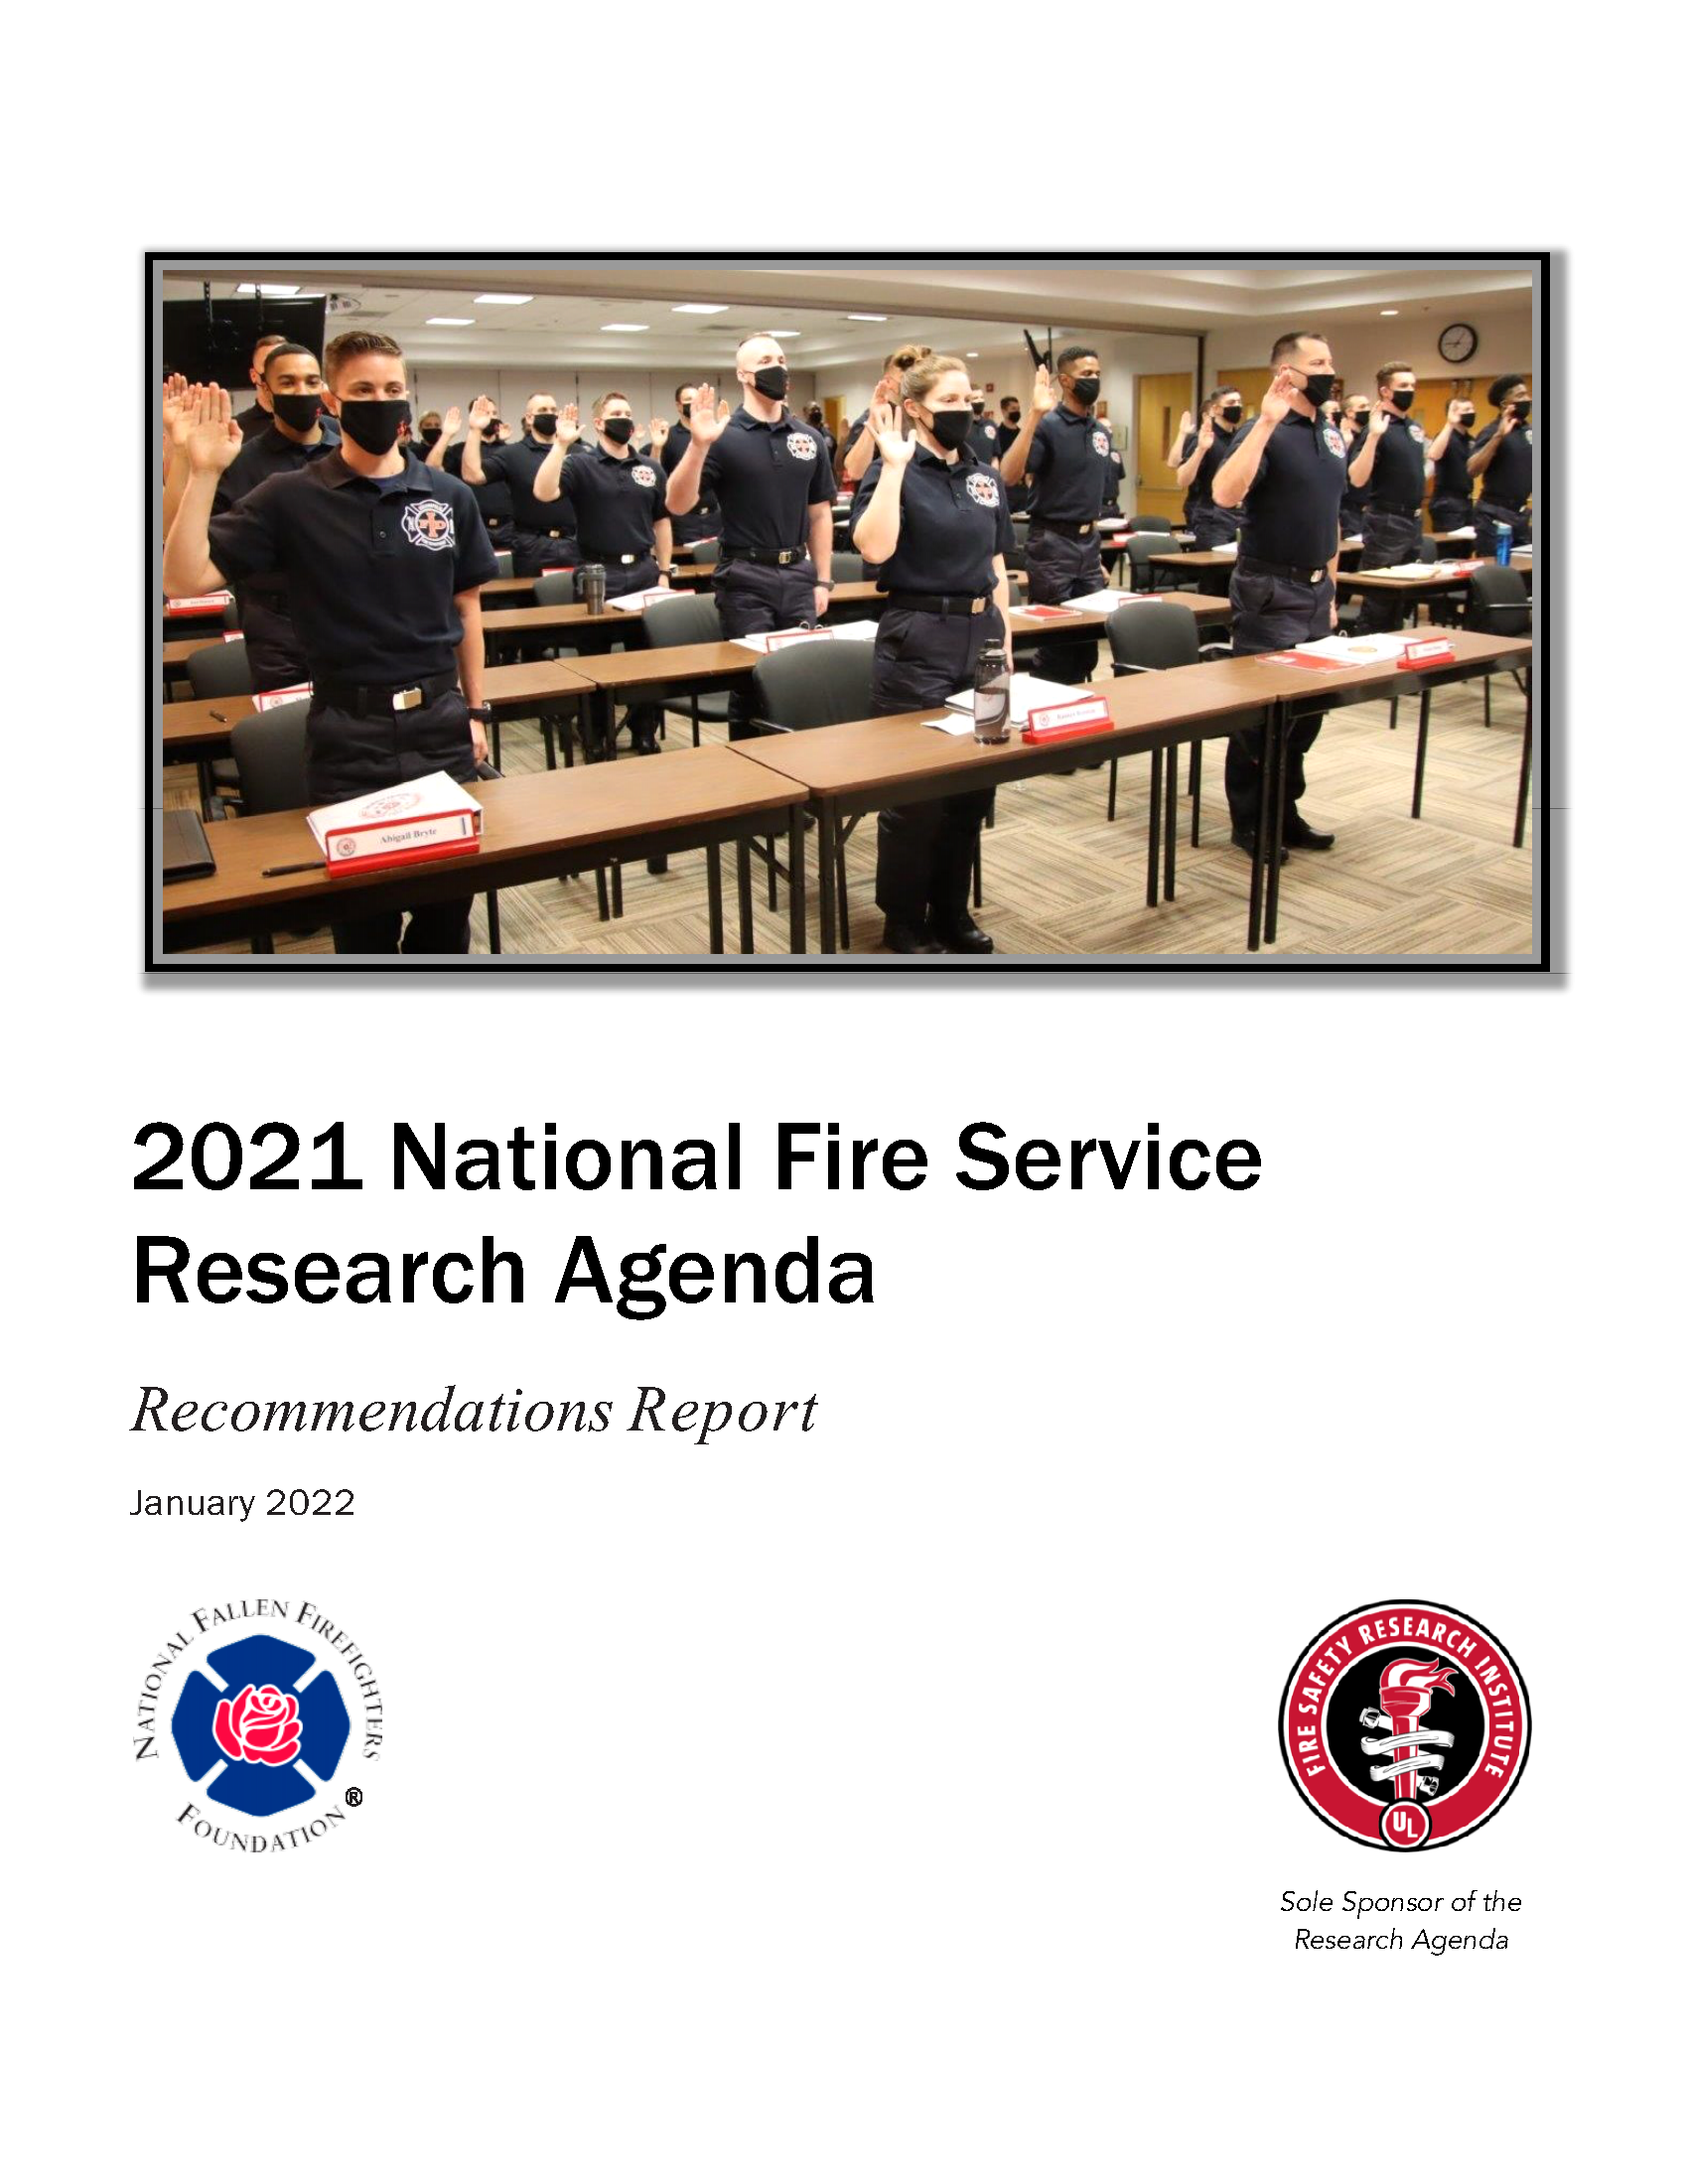 RaCERS Assists with National Fire Service Research Agenda